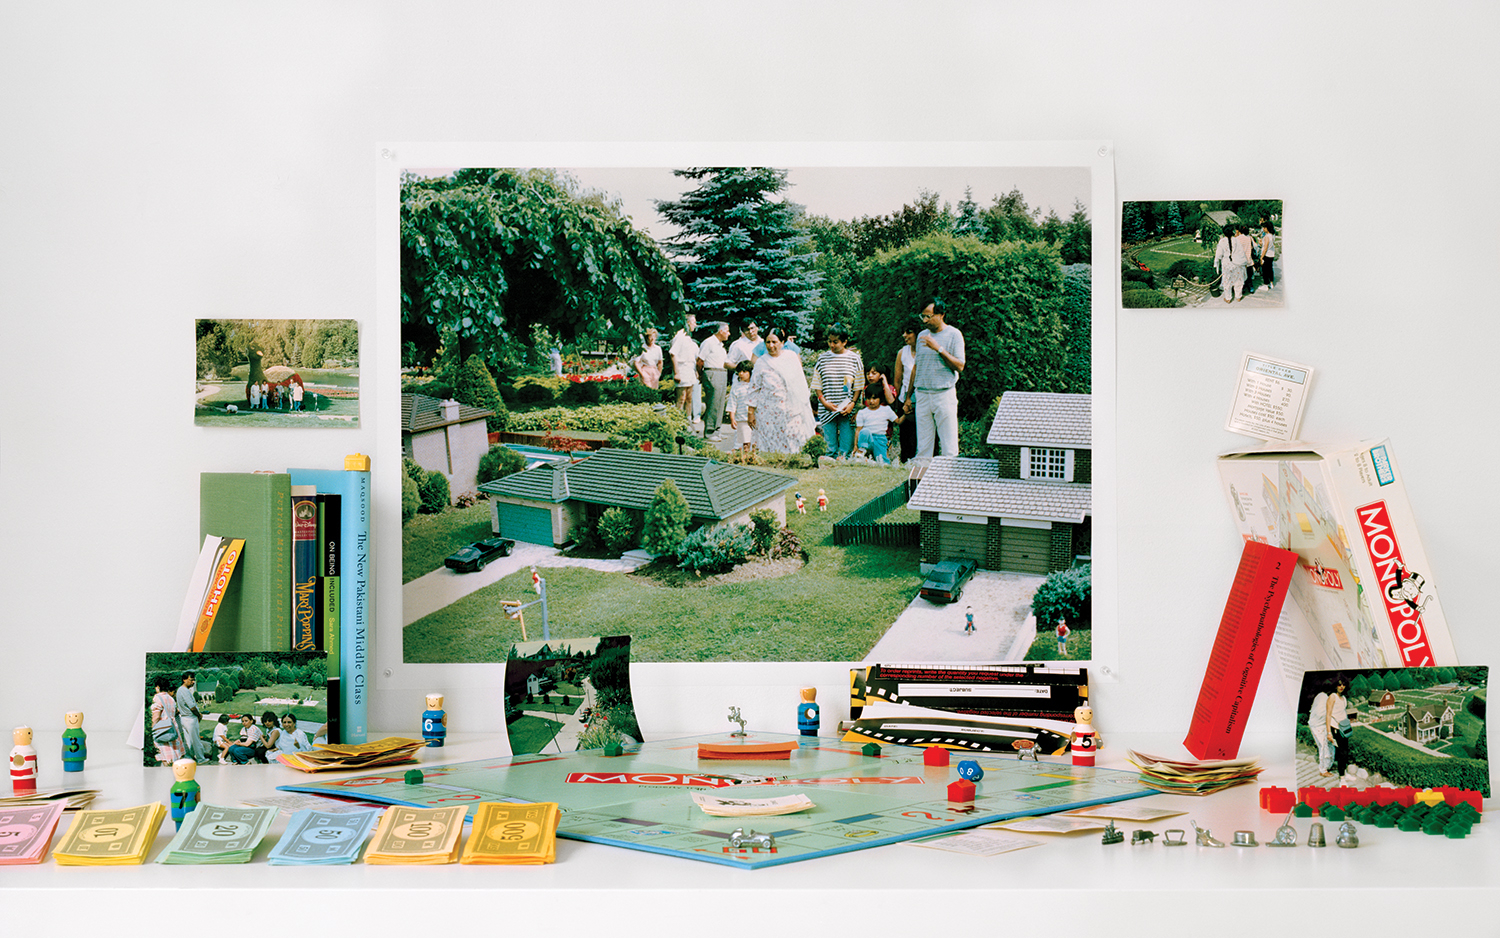     Zinnia Naqvi, Keep Off the Grass &#8211; Cullen Gardens and Miniature Village, 1988, 2019. Courtesy of the artist.

